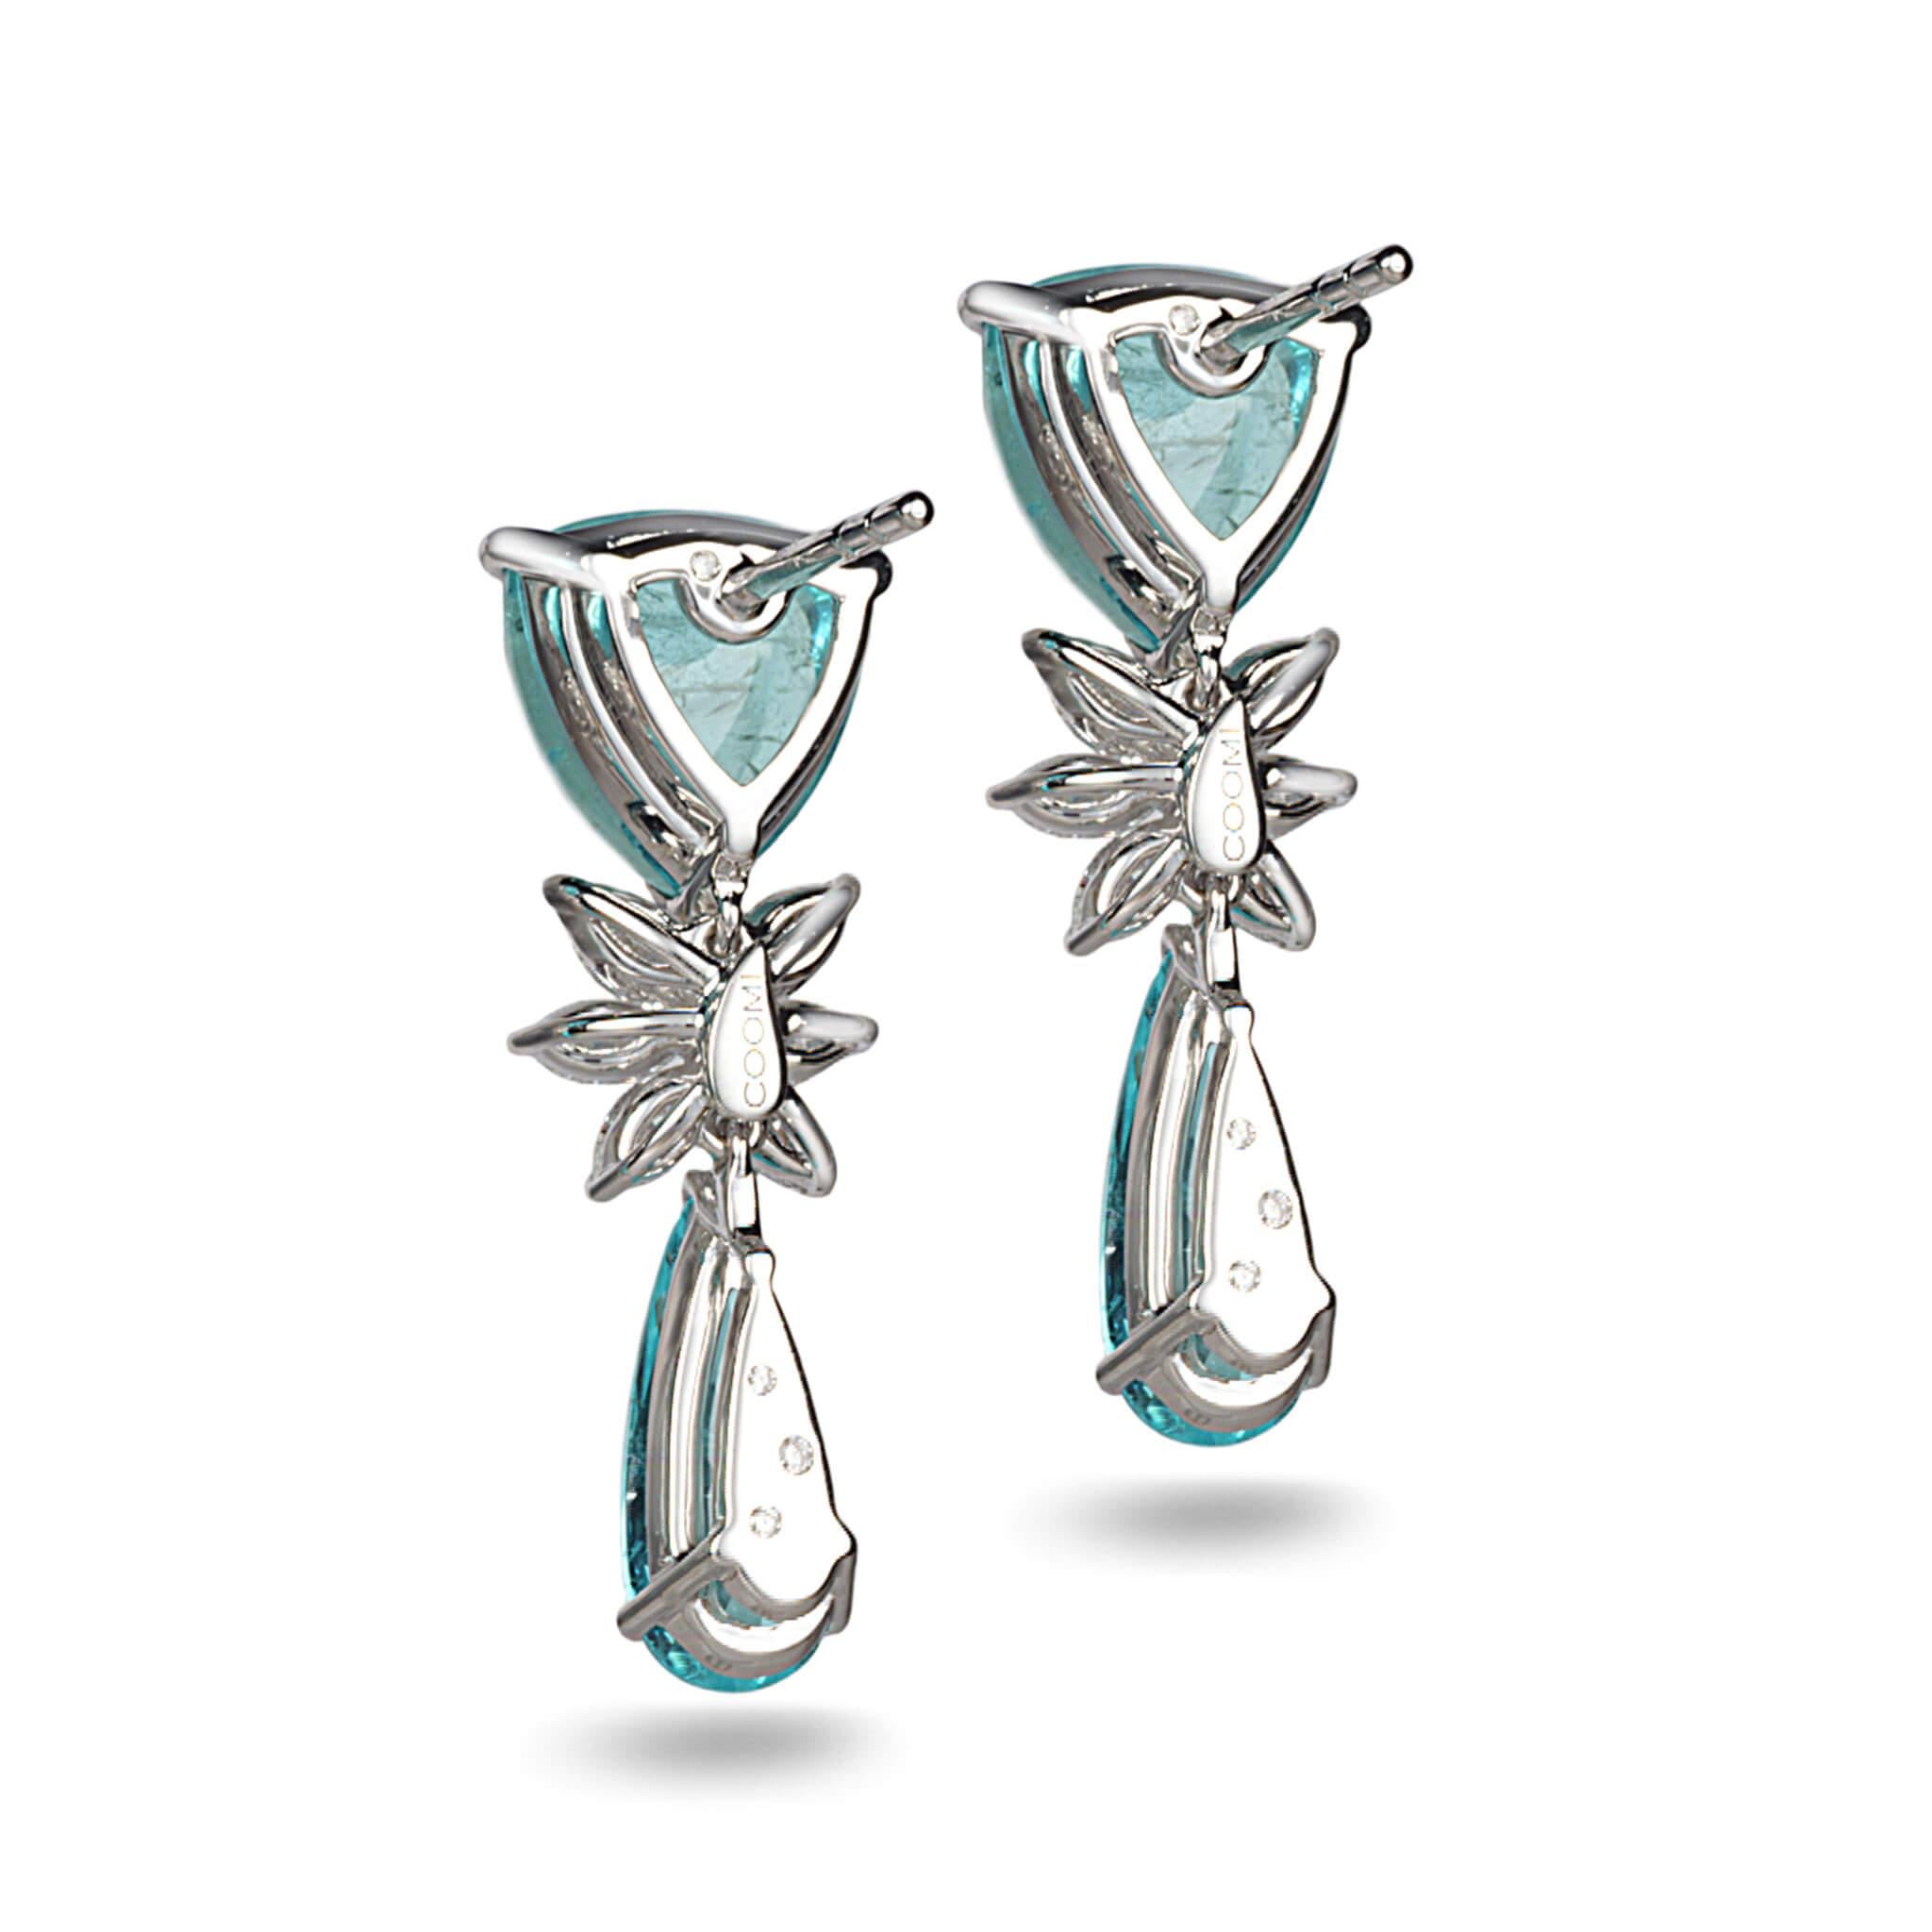 Trinity double drop earrings set in 18K white gold with 12.33cts paraiba tourmaline and 1.34cts diamond.
